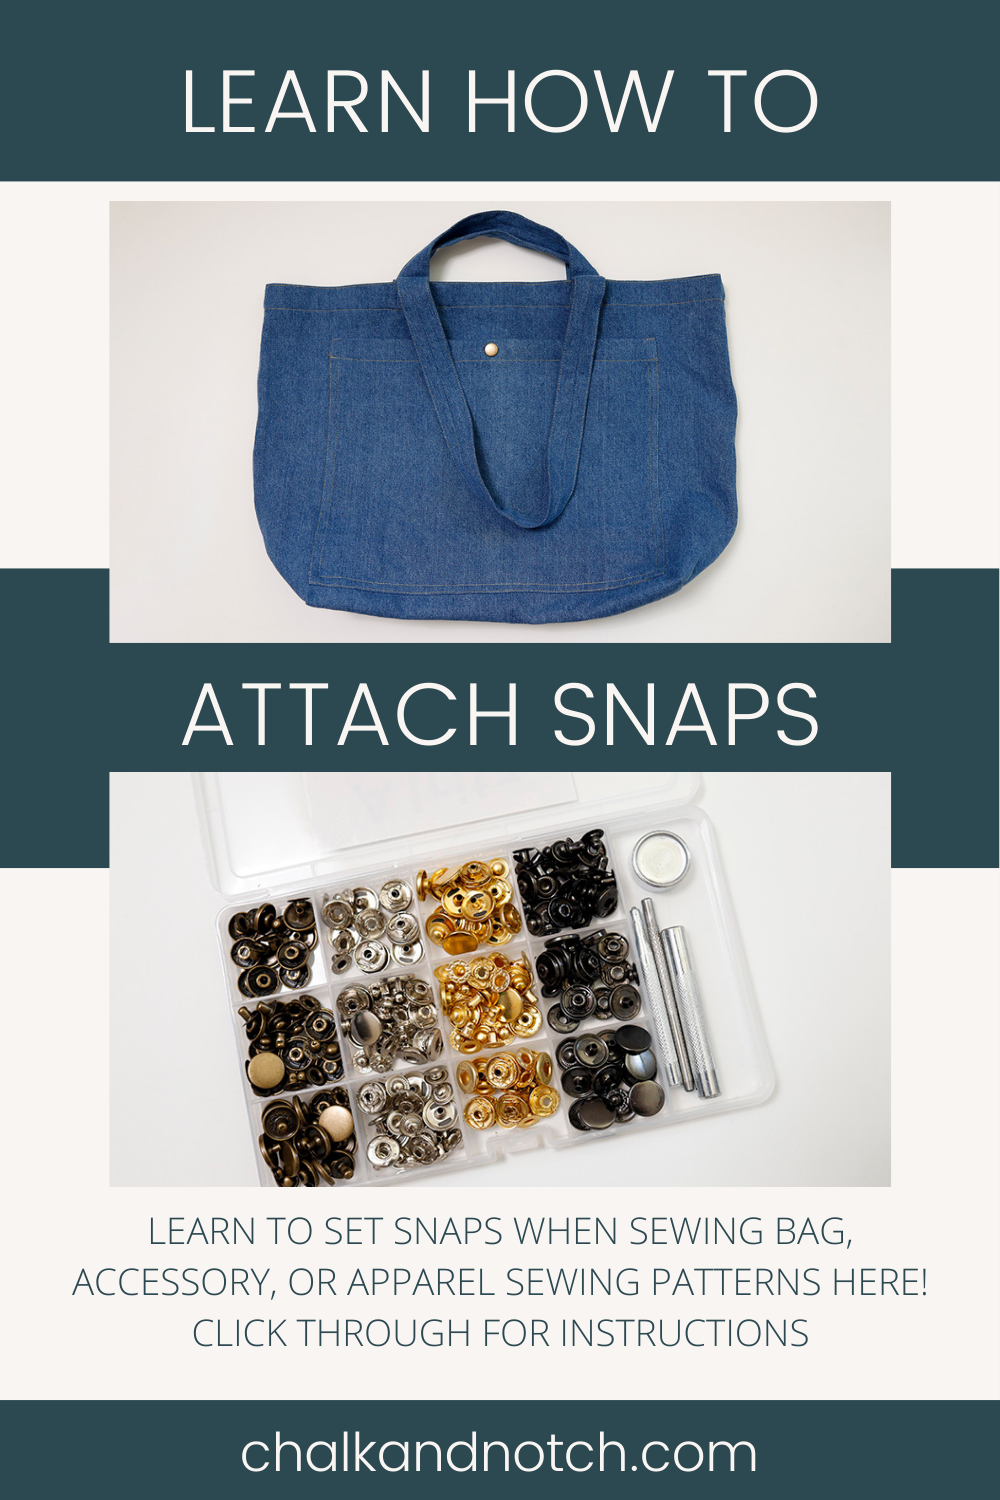 Sewing Tips | How to Attach Snaps. A sewing tutorial for setting snaps when sewing bag or clothing sewing patterns.